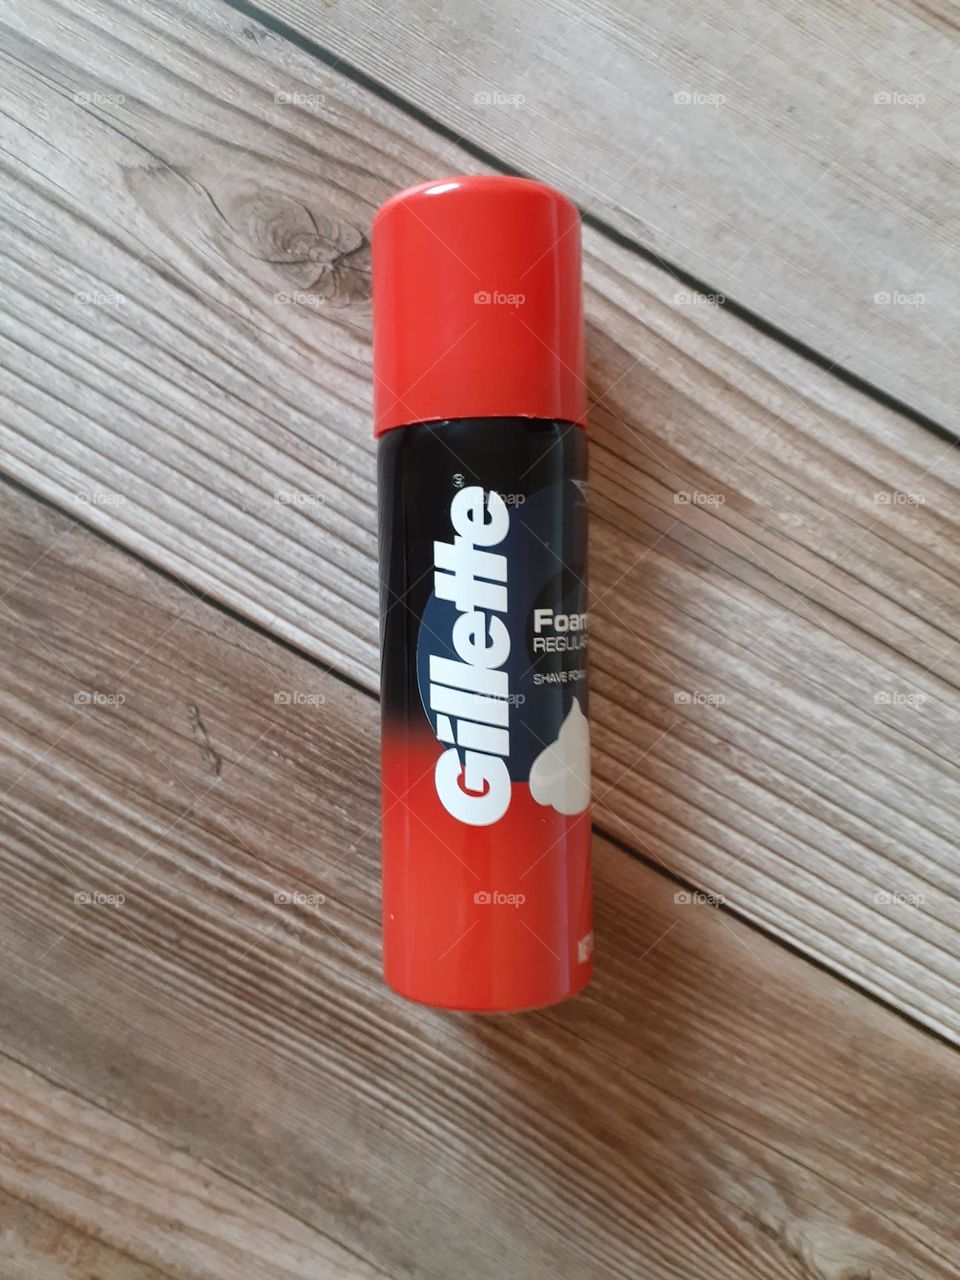 A  close up photo of a man's product Gillette Foamy Regular Shave Cream on a wood background.